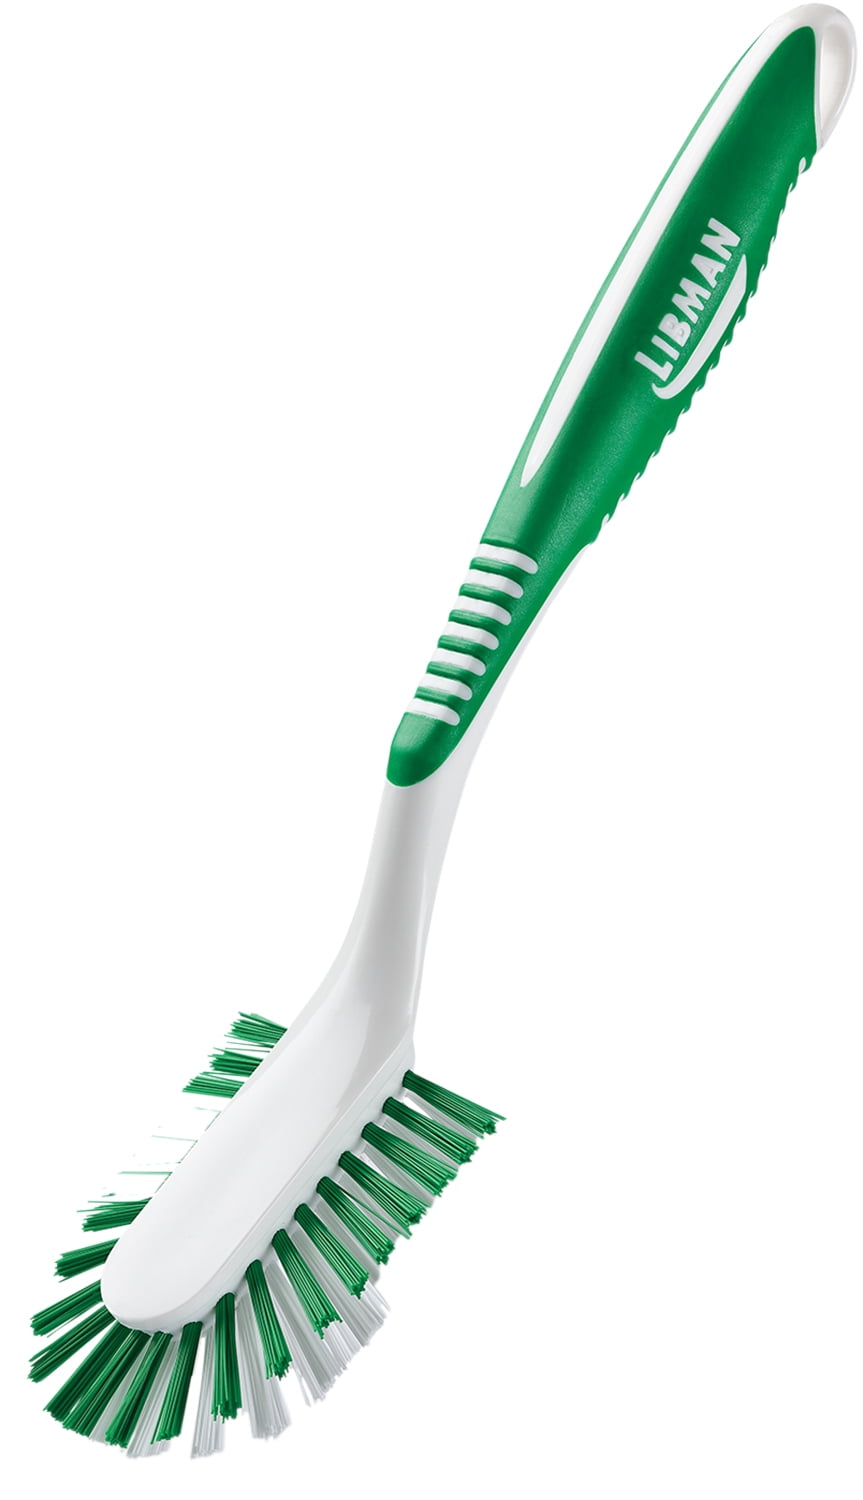 Libman 00566 Silver Stainless Steel Long Handle Grill Brush 19 L in. 